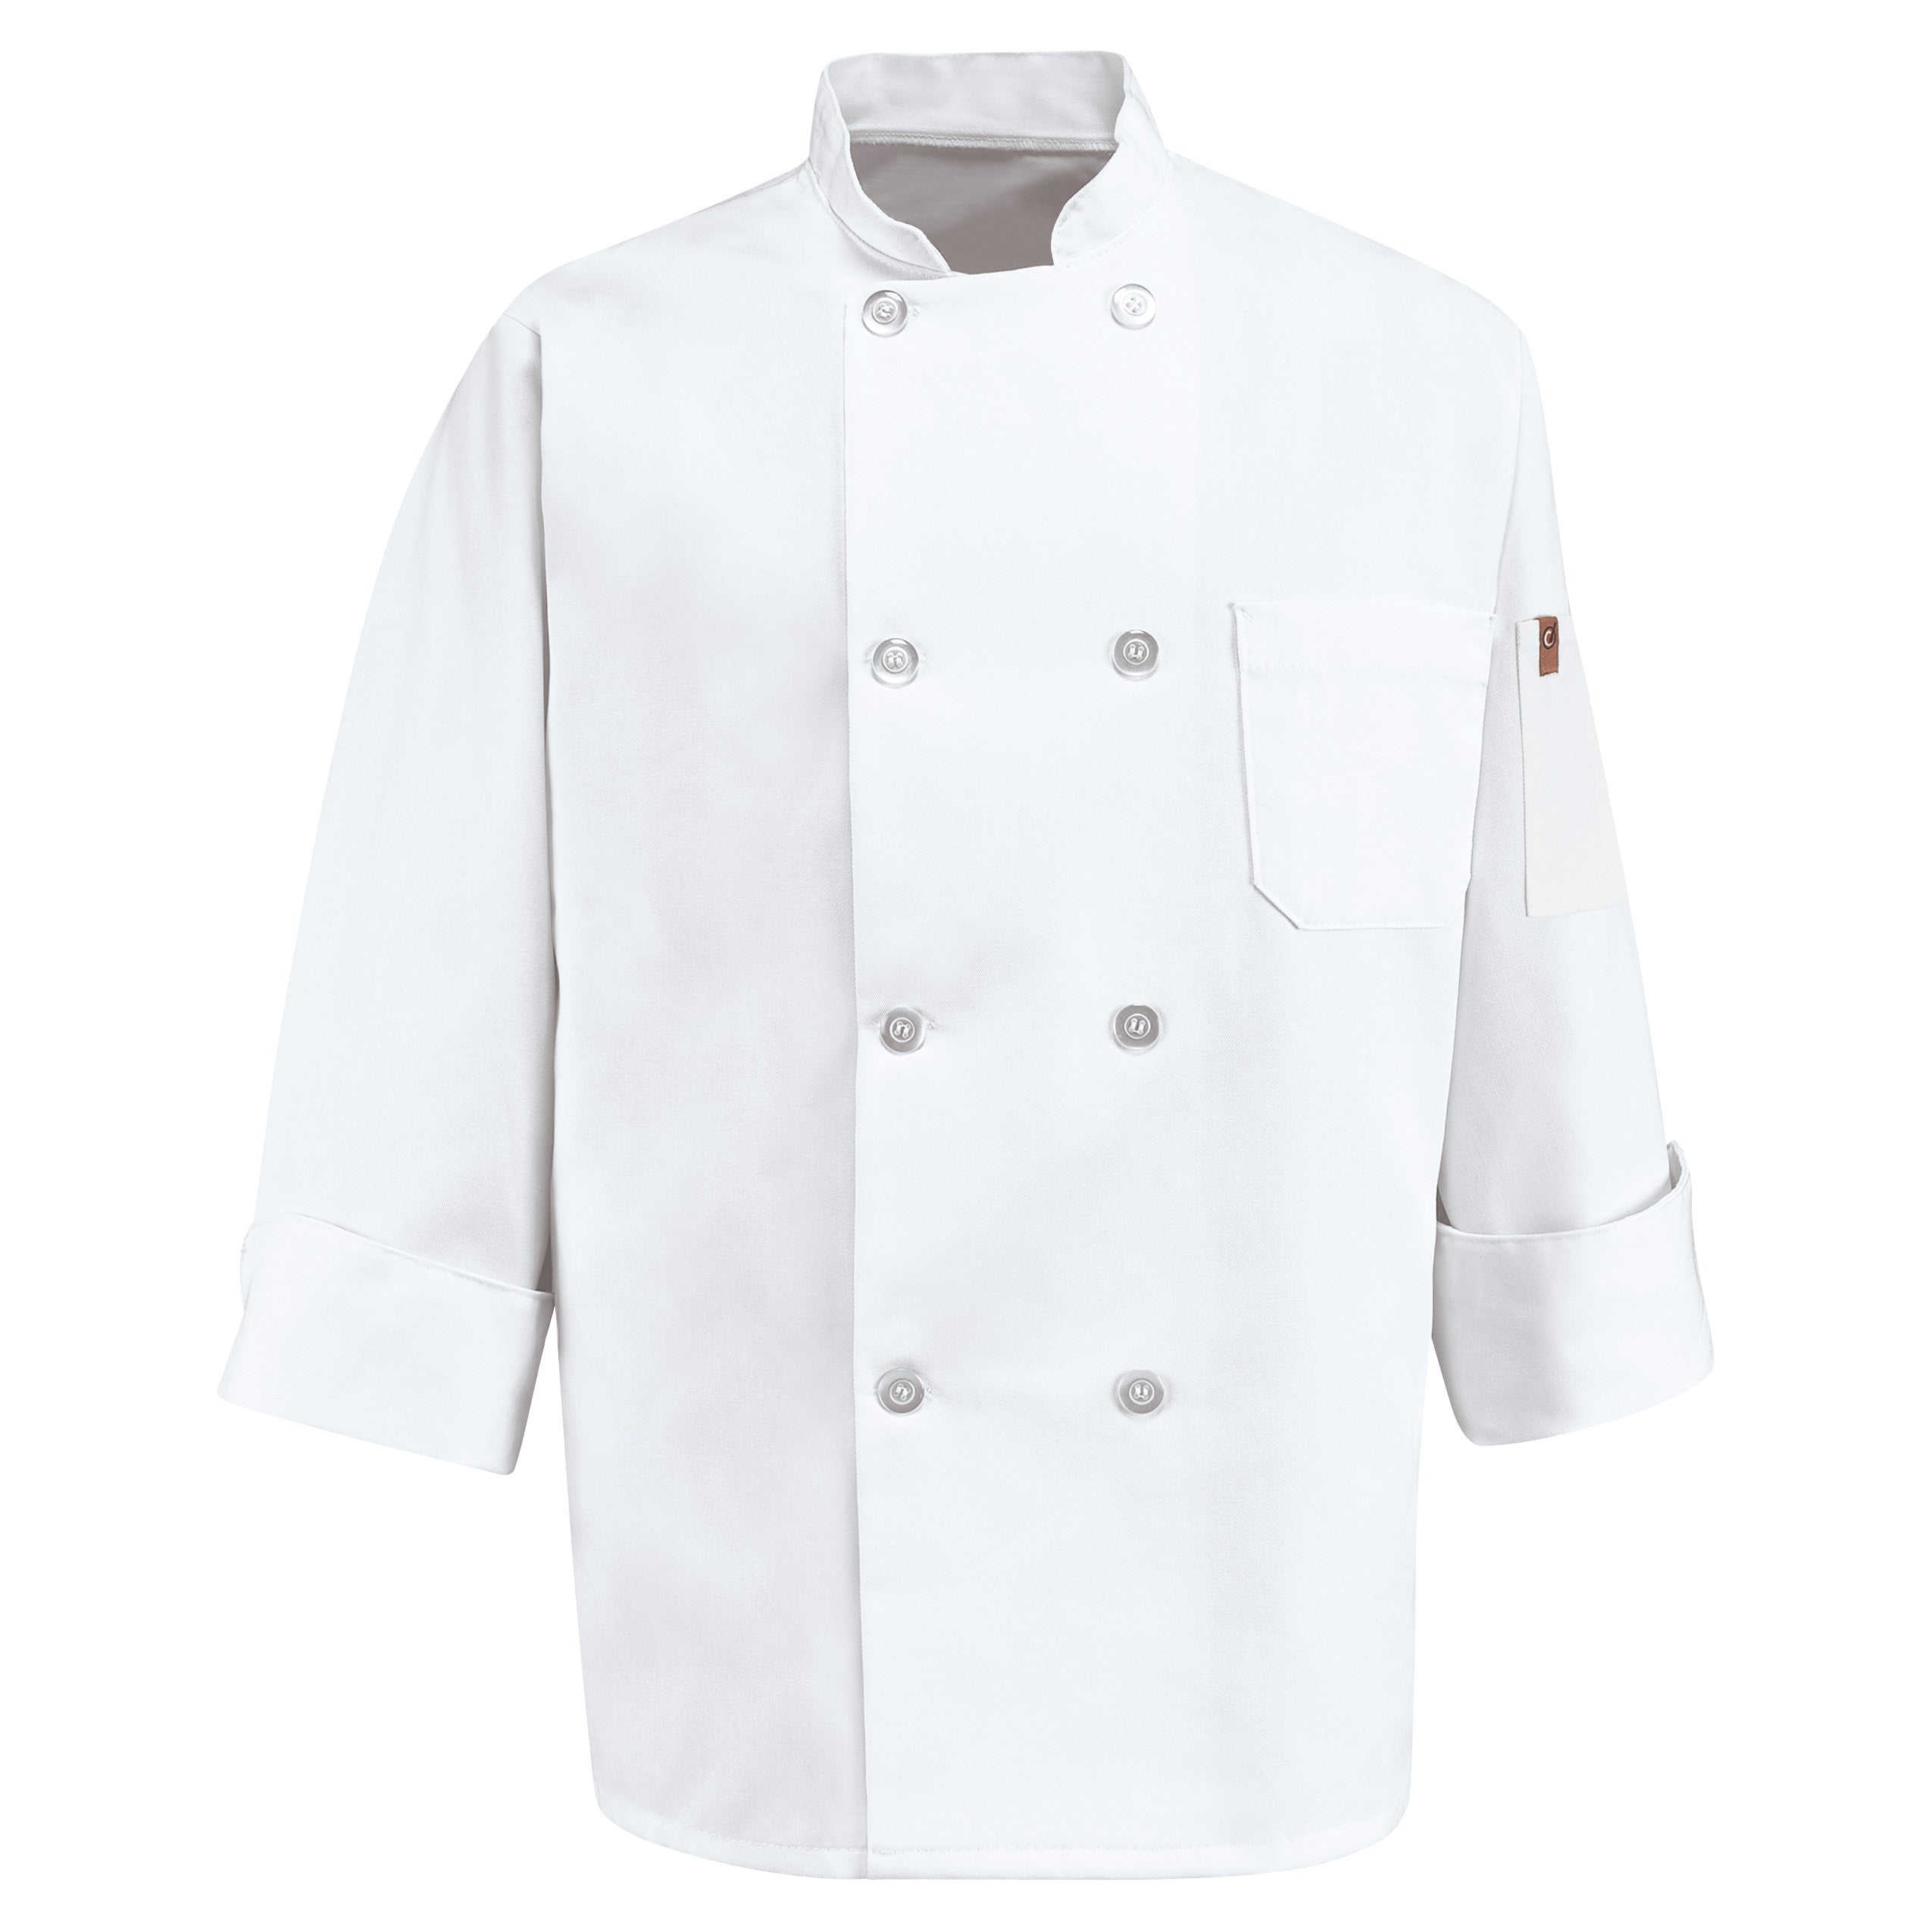 Eight Pearl Button Chef Coat with Thermometer Pocket 0413 - White-eSafety Supplies, Inc